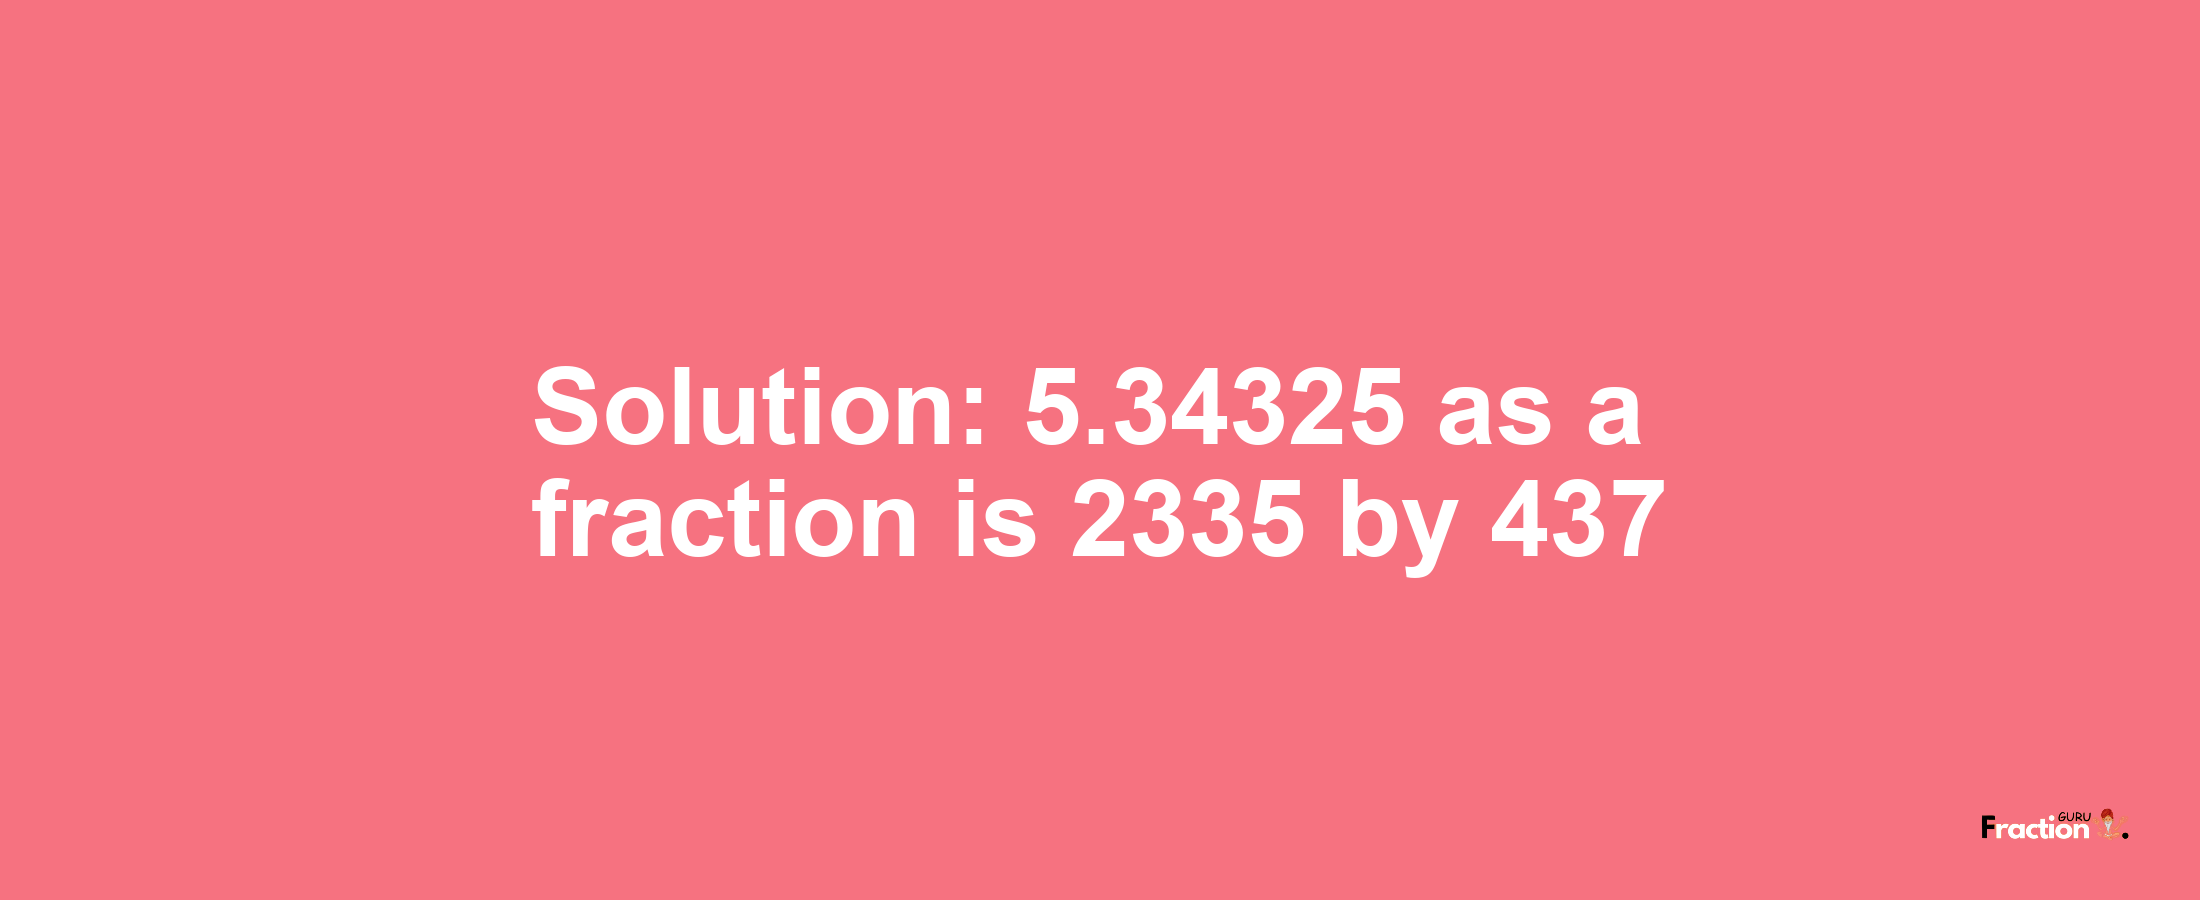 Solution:5.34325 as a fraction is 2335/437